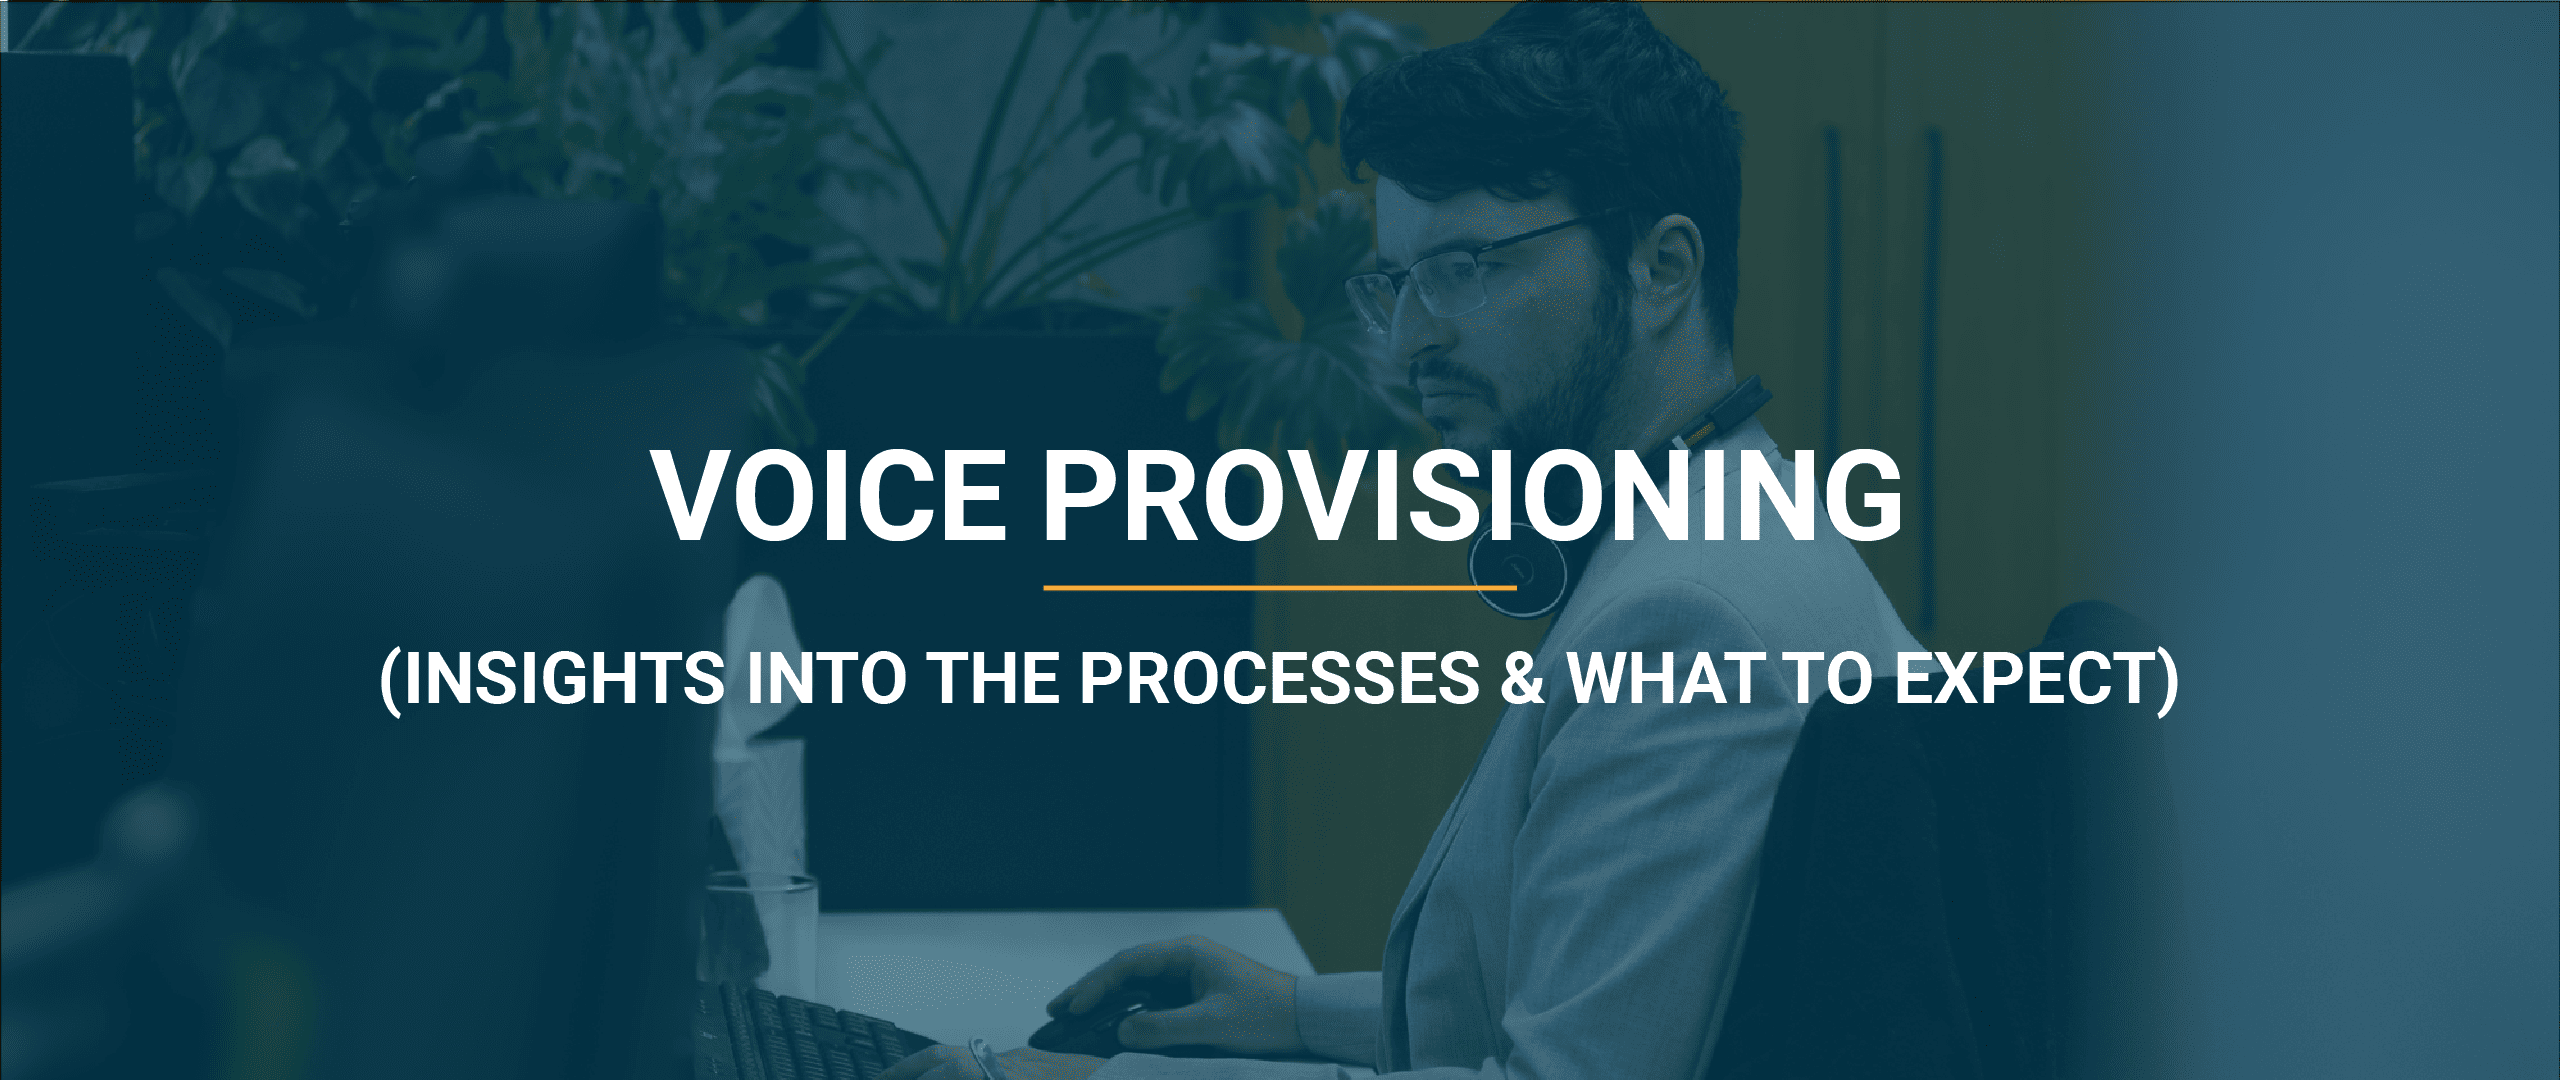 Voice provisioning for SIP Trunks, Teams Calling, and 3CX